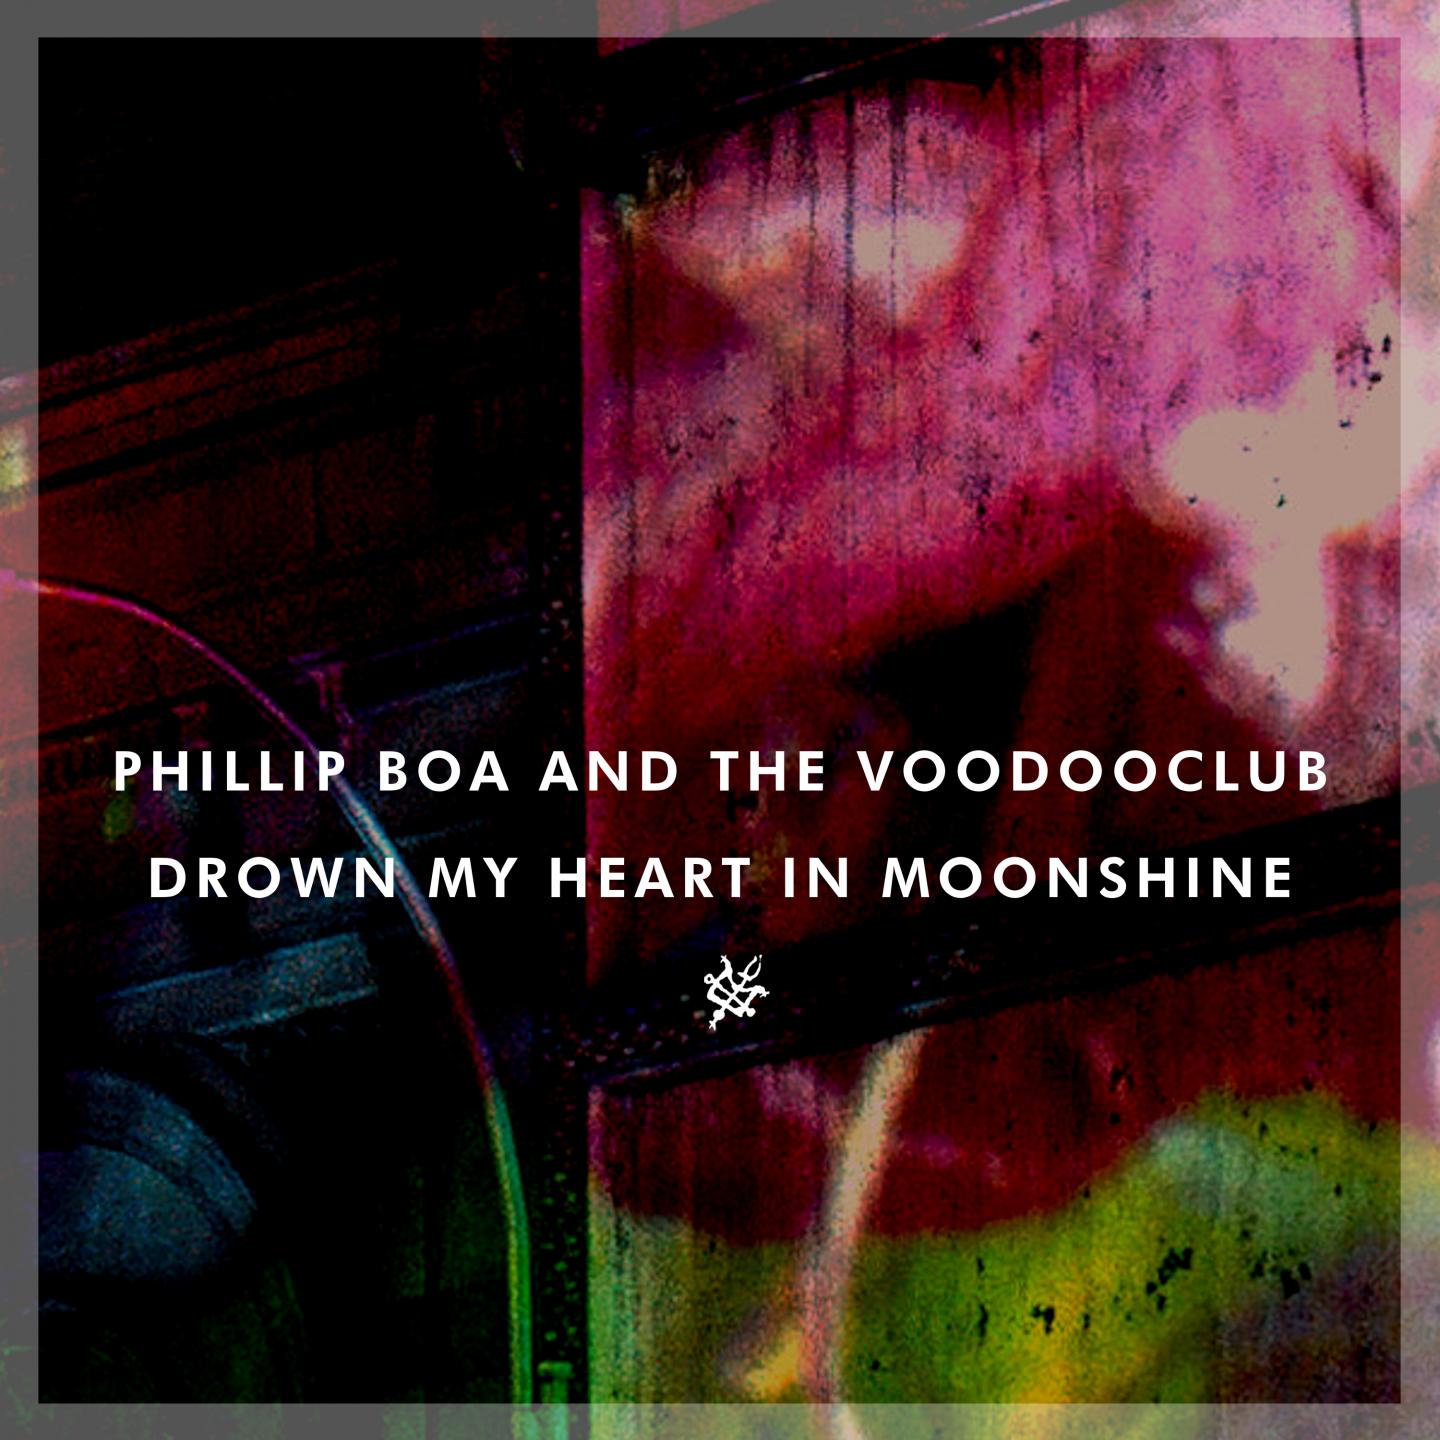 Drown My Heart in Moonshine